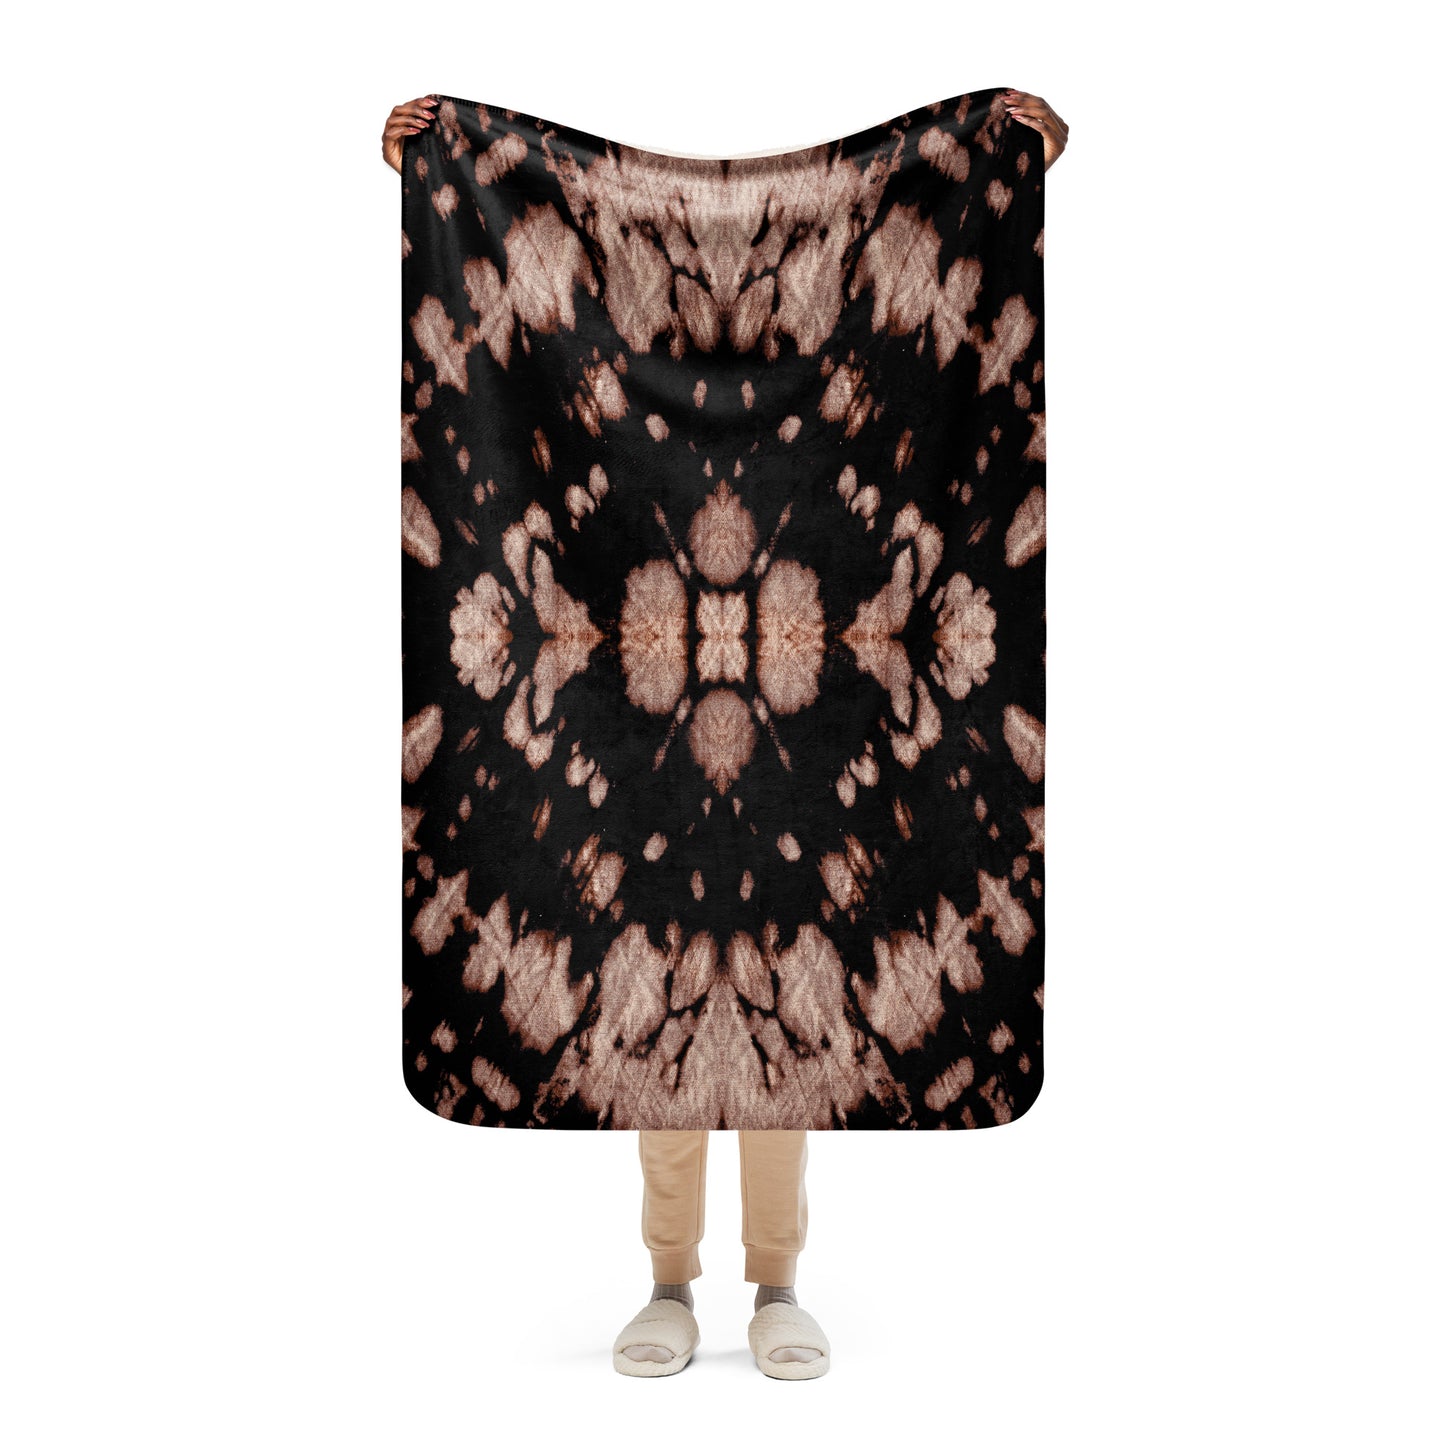 ABSTRACT BROWN SHERPA BLANKET